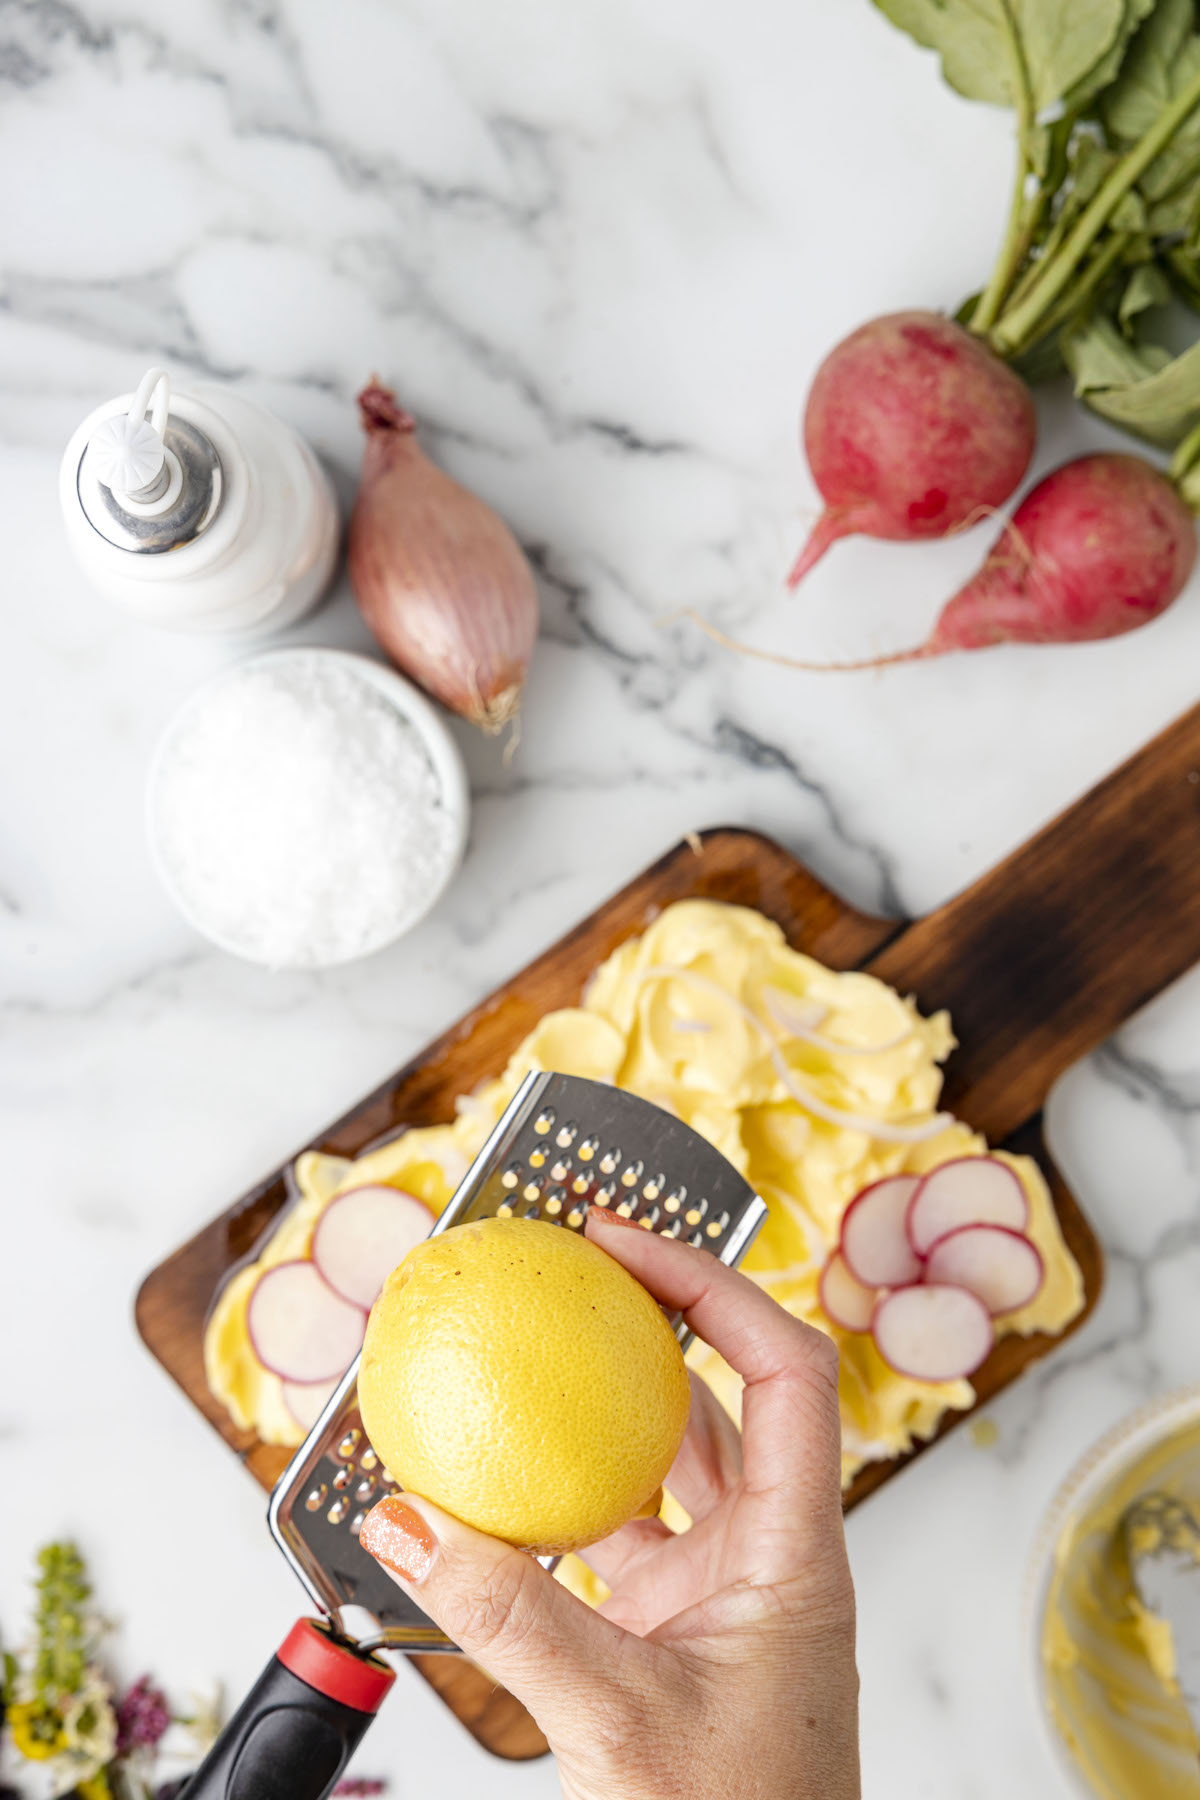 zesting a lemon with a grater over a butter board